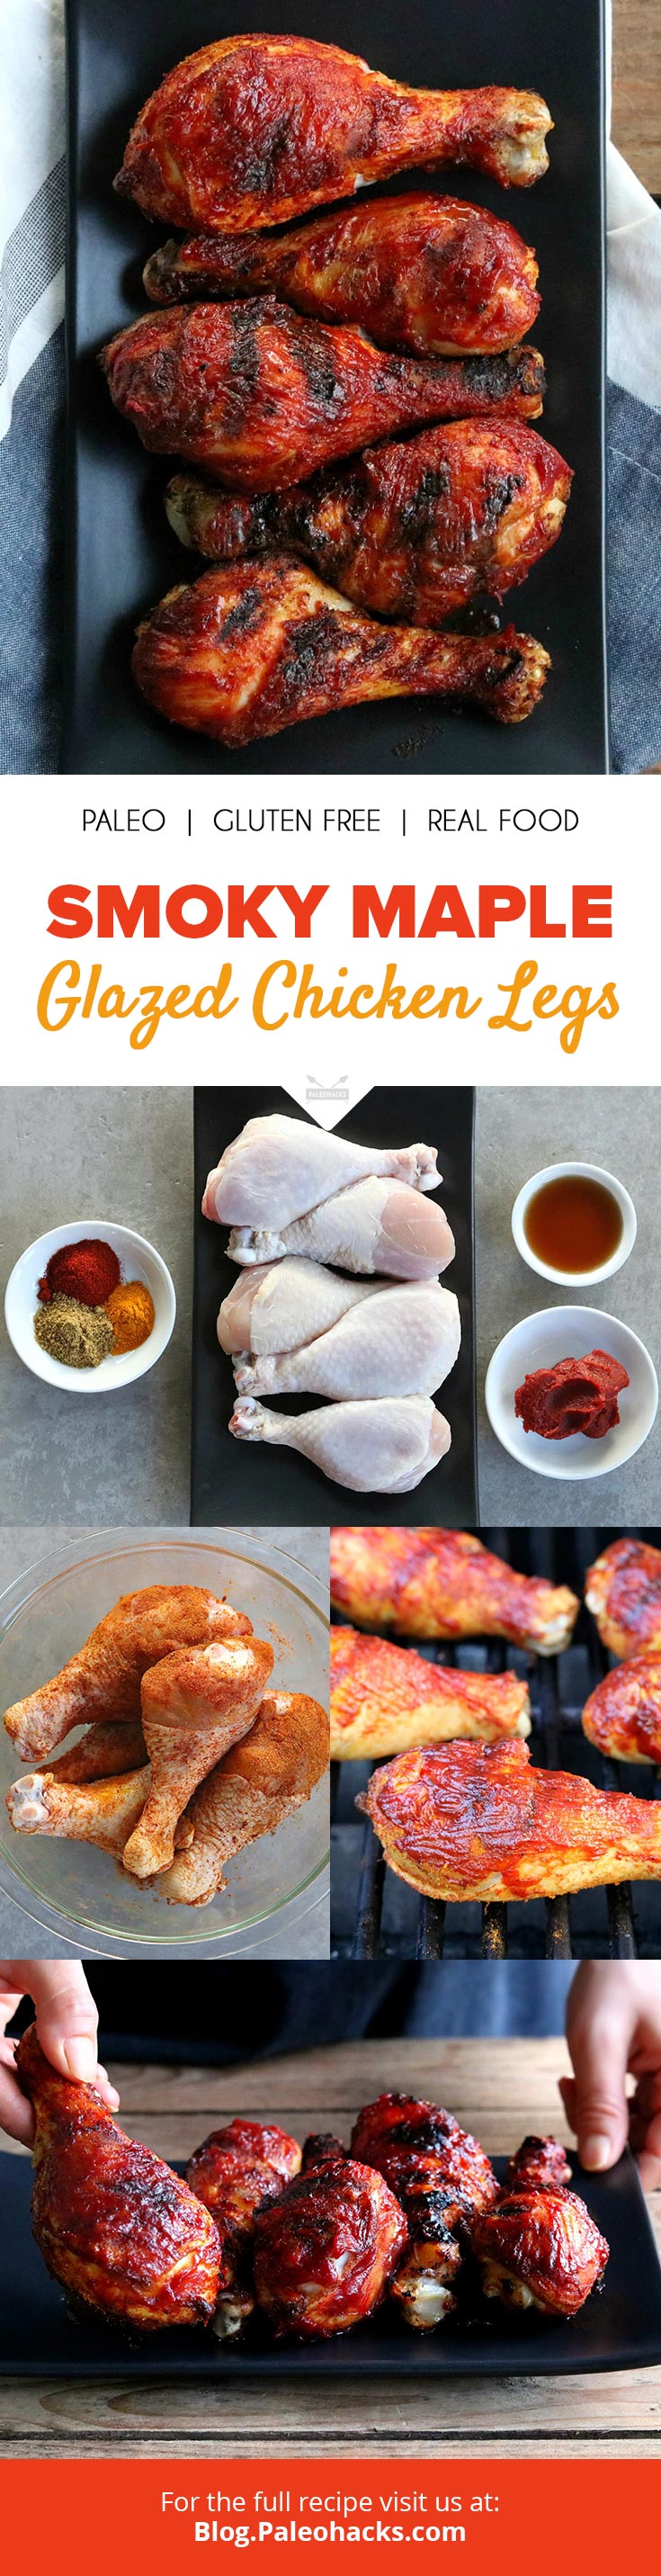 Chicken legs have a unique mixture of dark and light meat that creates a juicy flavor. Fire up your grill and bite into these maple glazed chicken legs!